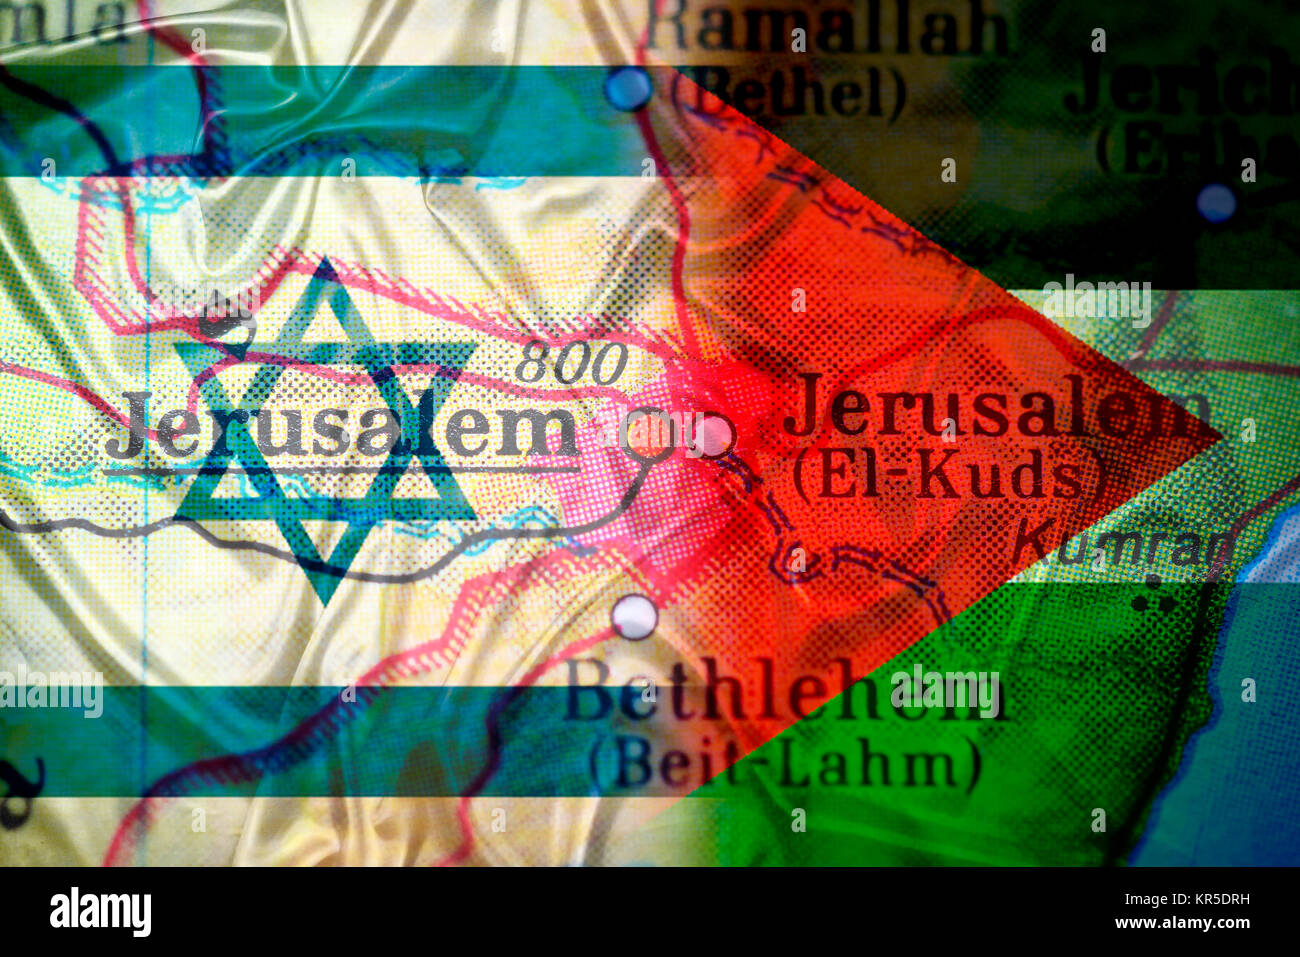 Flags of Israel and Palestine on map of Jerusalem, Jerusalem conflict, Fahnen von Israel und Palästina auf Landkarte von Jerusalem, Jerusalem-Konflikt Stock Photo